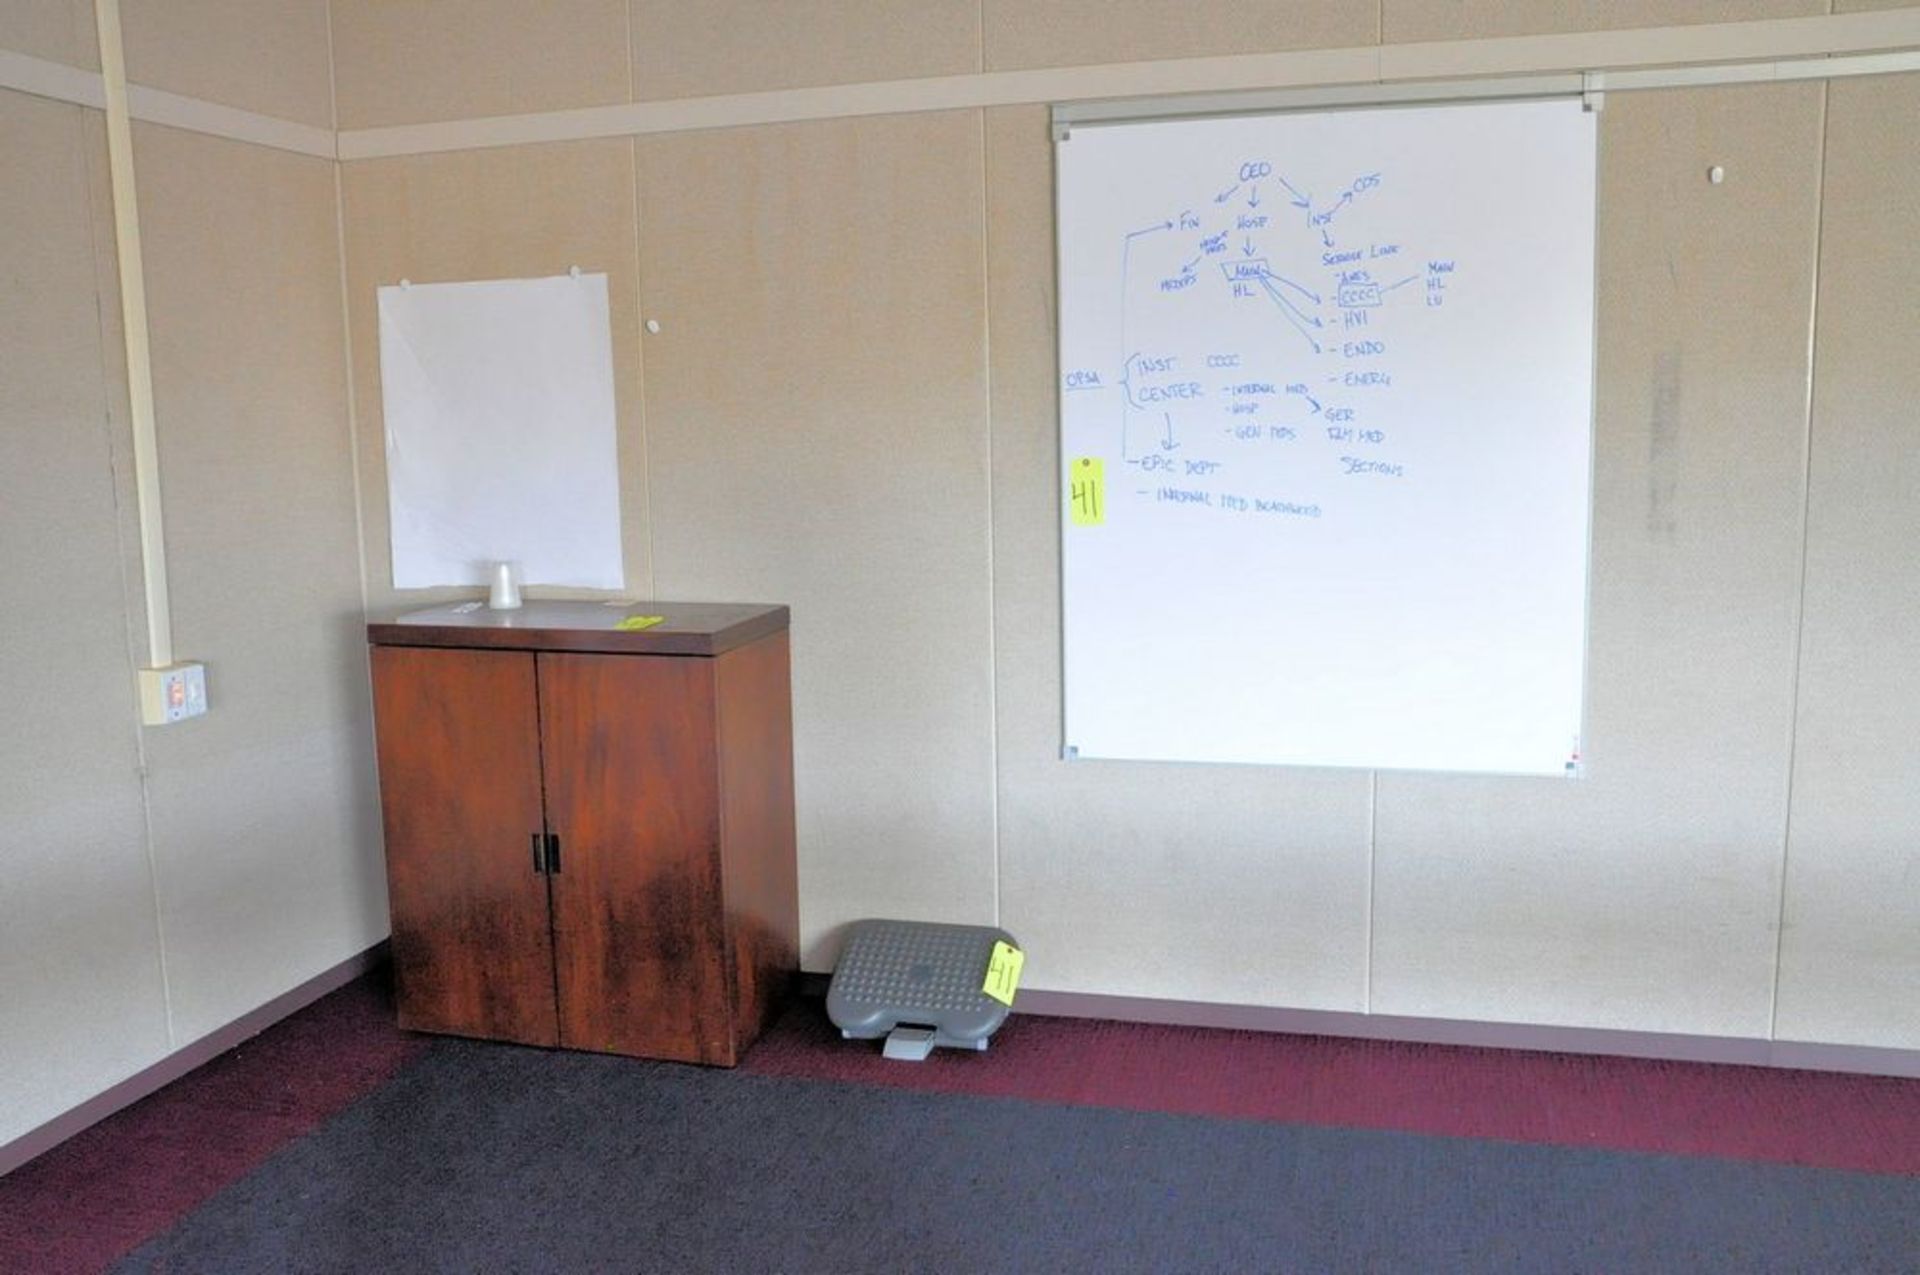 Lot-(1) Conference Table, with (1) 2-Door Storage Cabinet, (1) Foot Rest, and (1) Dry Erase Board in - Image 2 of 3